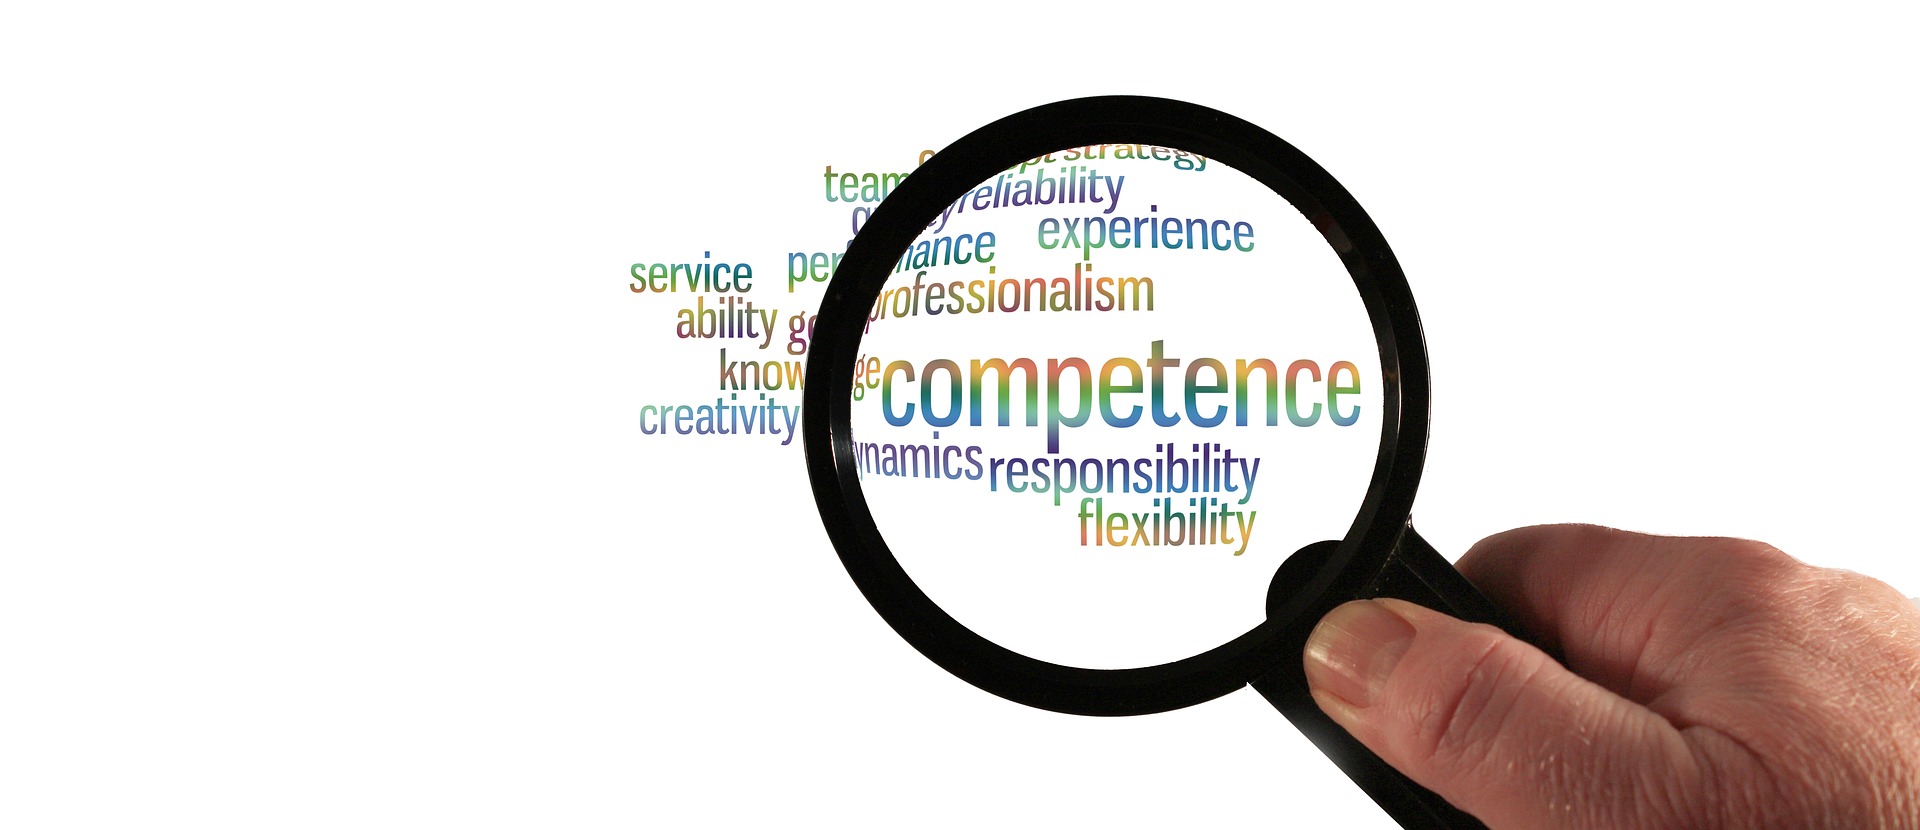 competence-2741773_1920